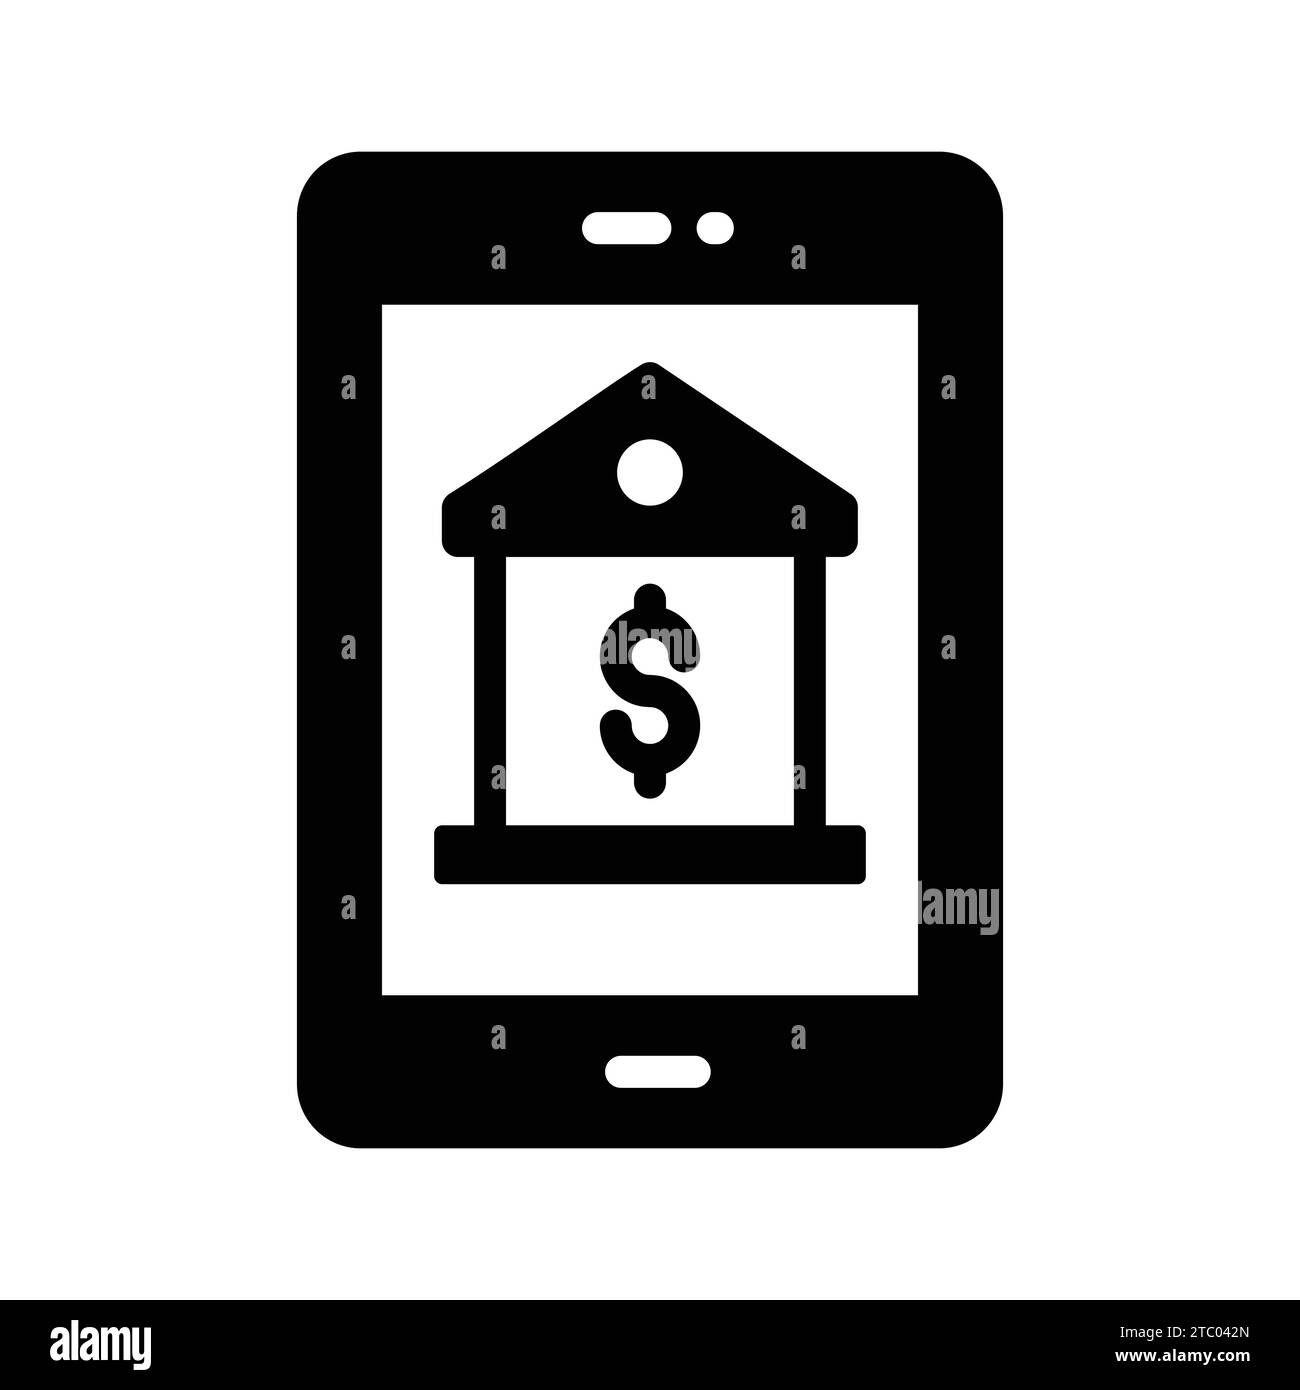 Bank inside mobile denoting concept icon of banking app, ready for premium use. Stock Vector